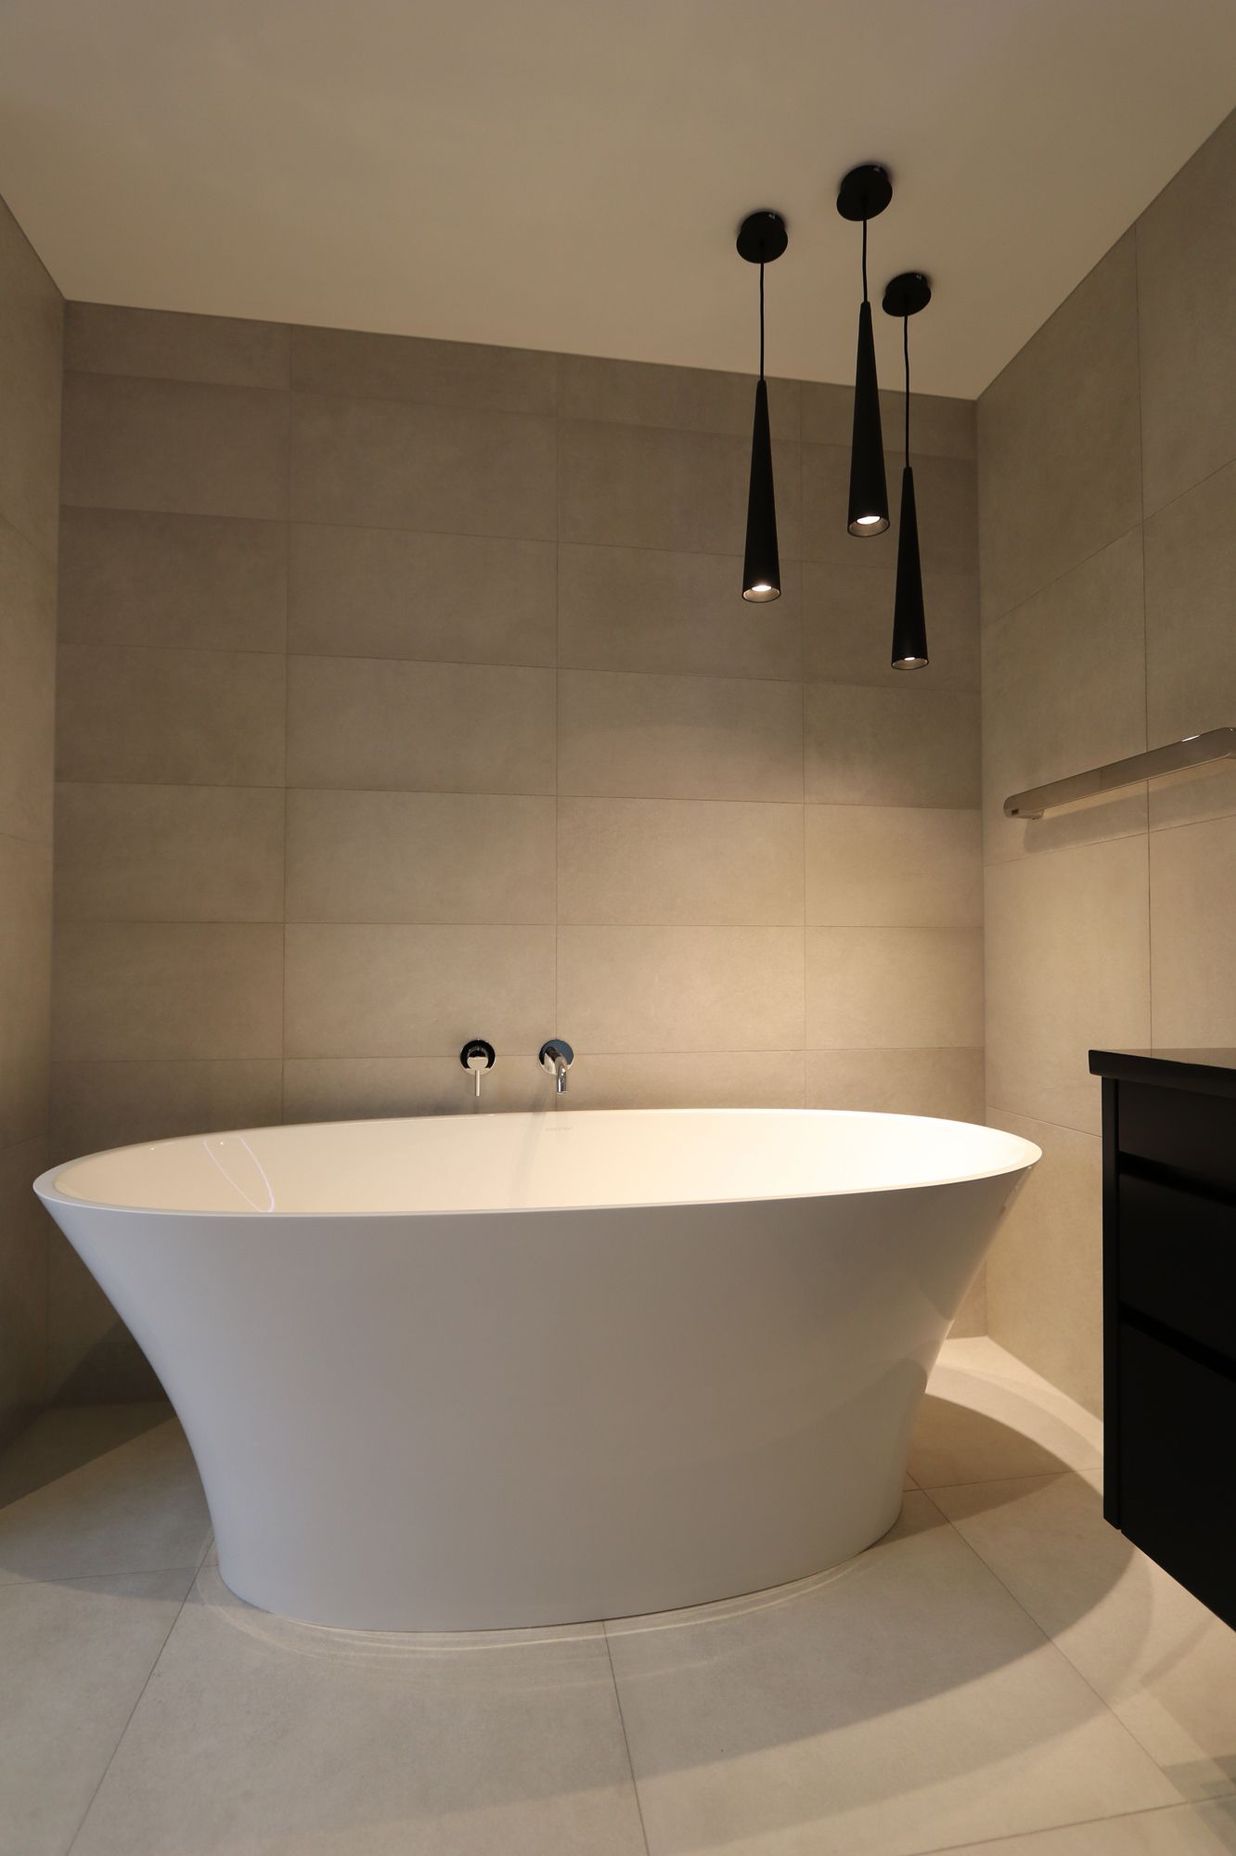 The stunning feature bath takes the cake in this award-winning bathroom.